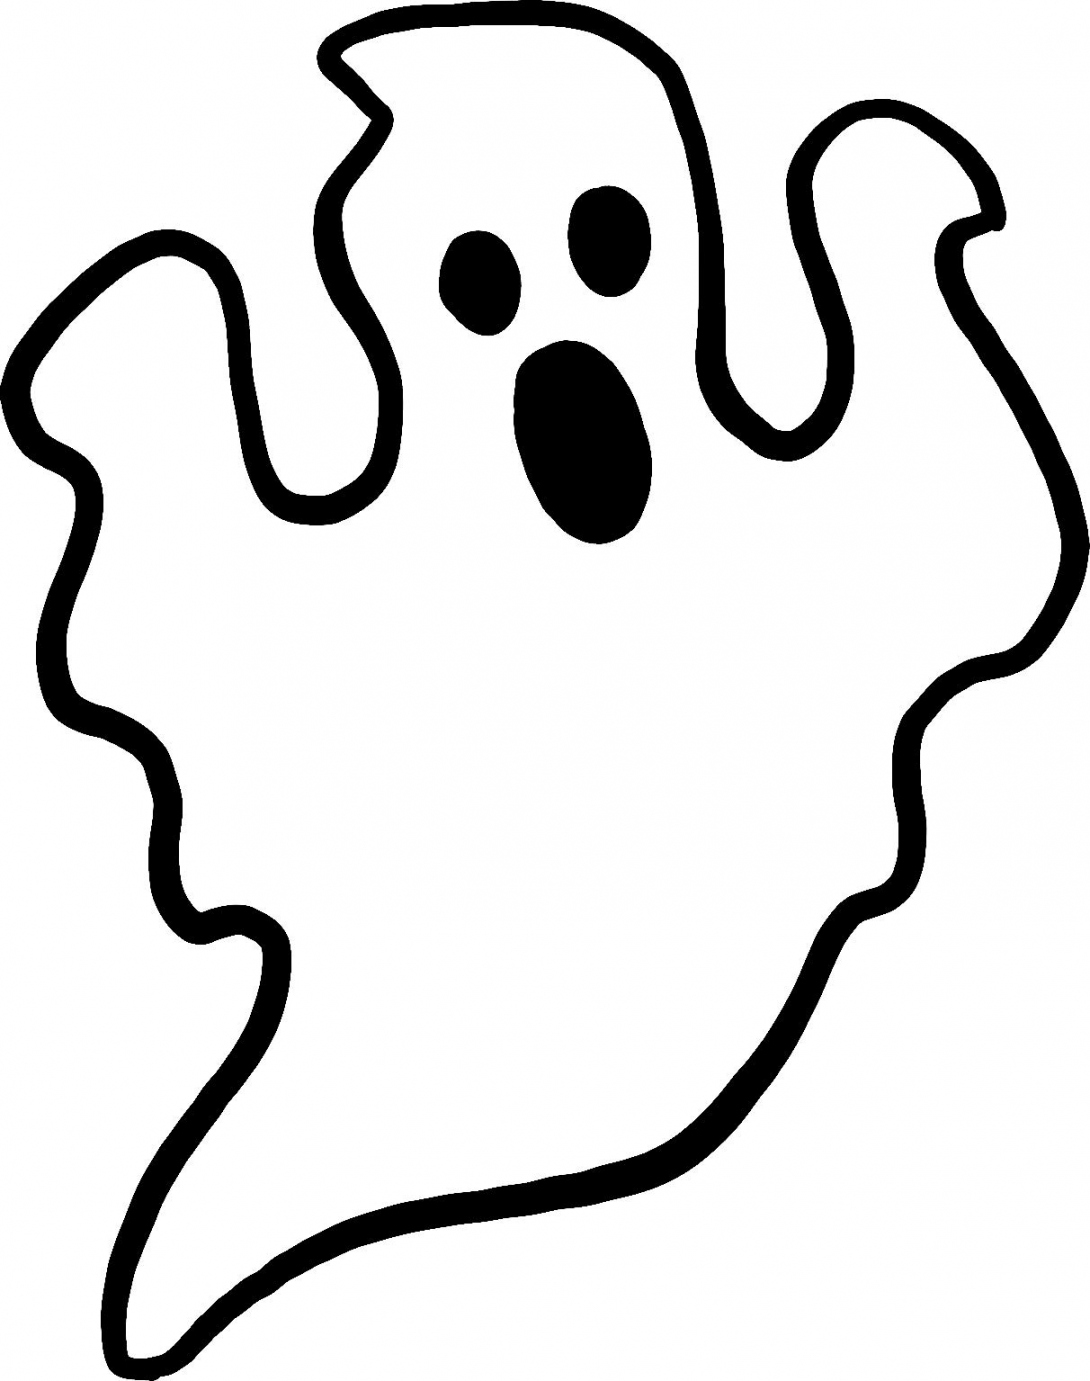 hBARSCI Ghost Outline Vinyl Decal -  Inches - for Cars, Trucks, Windows,  Laptops, Tablets, Outdoor-Grade - Ghost Outline